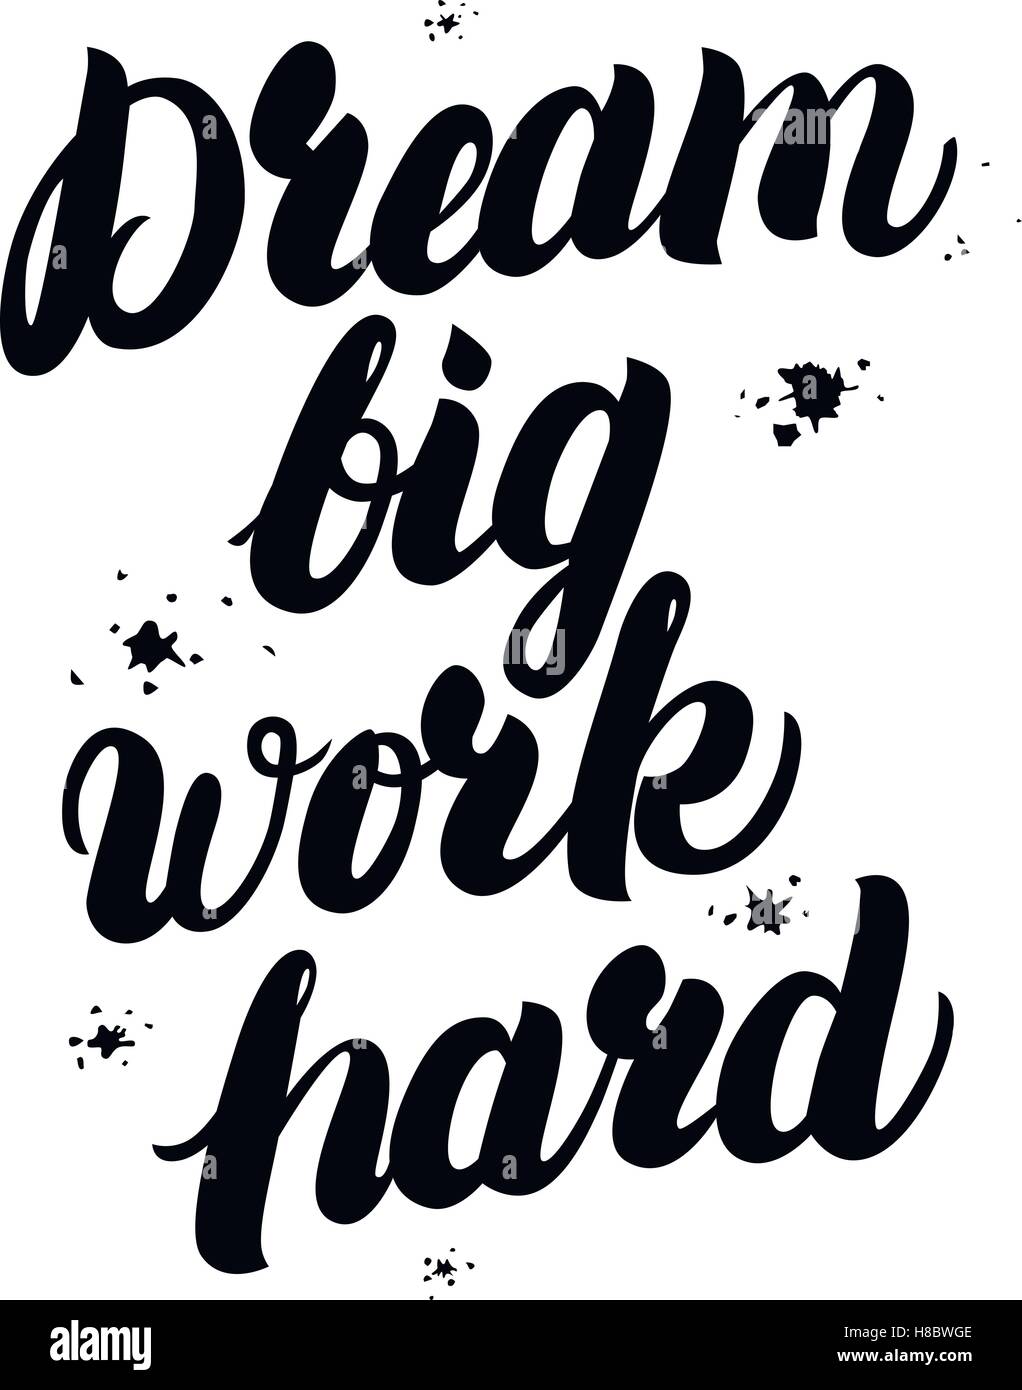 Dream big work hard motivational inspiring quote with splash background. Hand written lettering. Isolated on white background. T Stock Vector